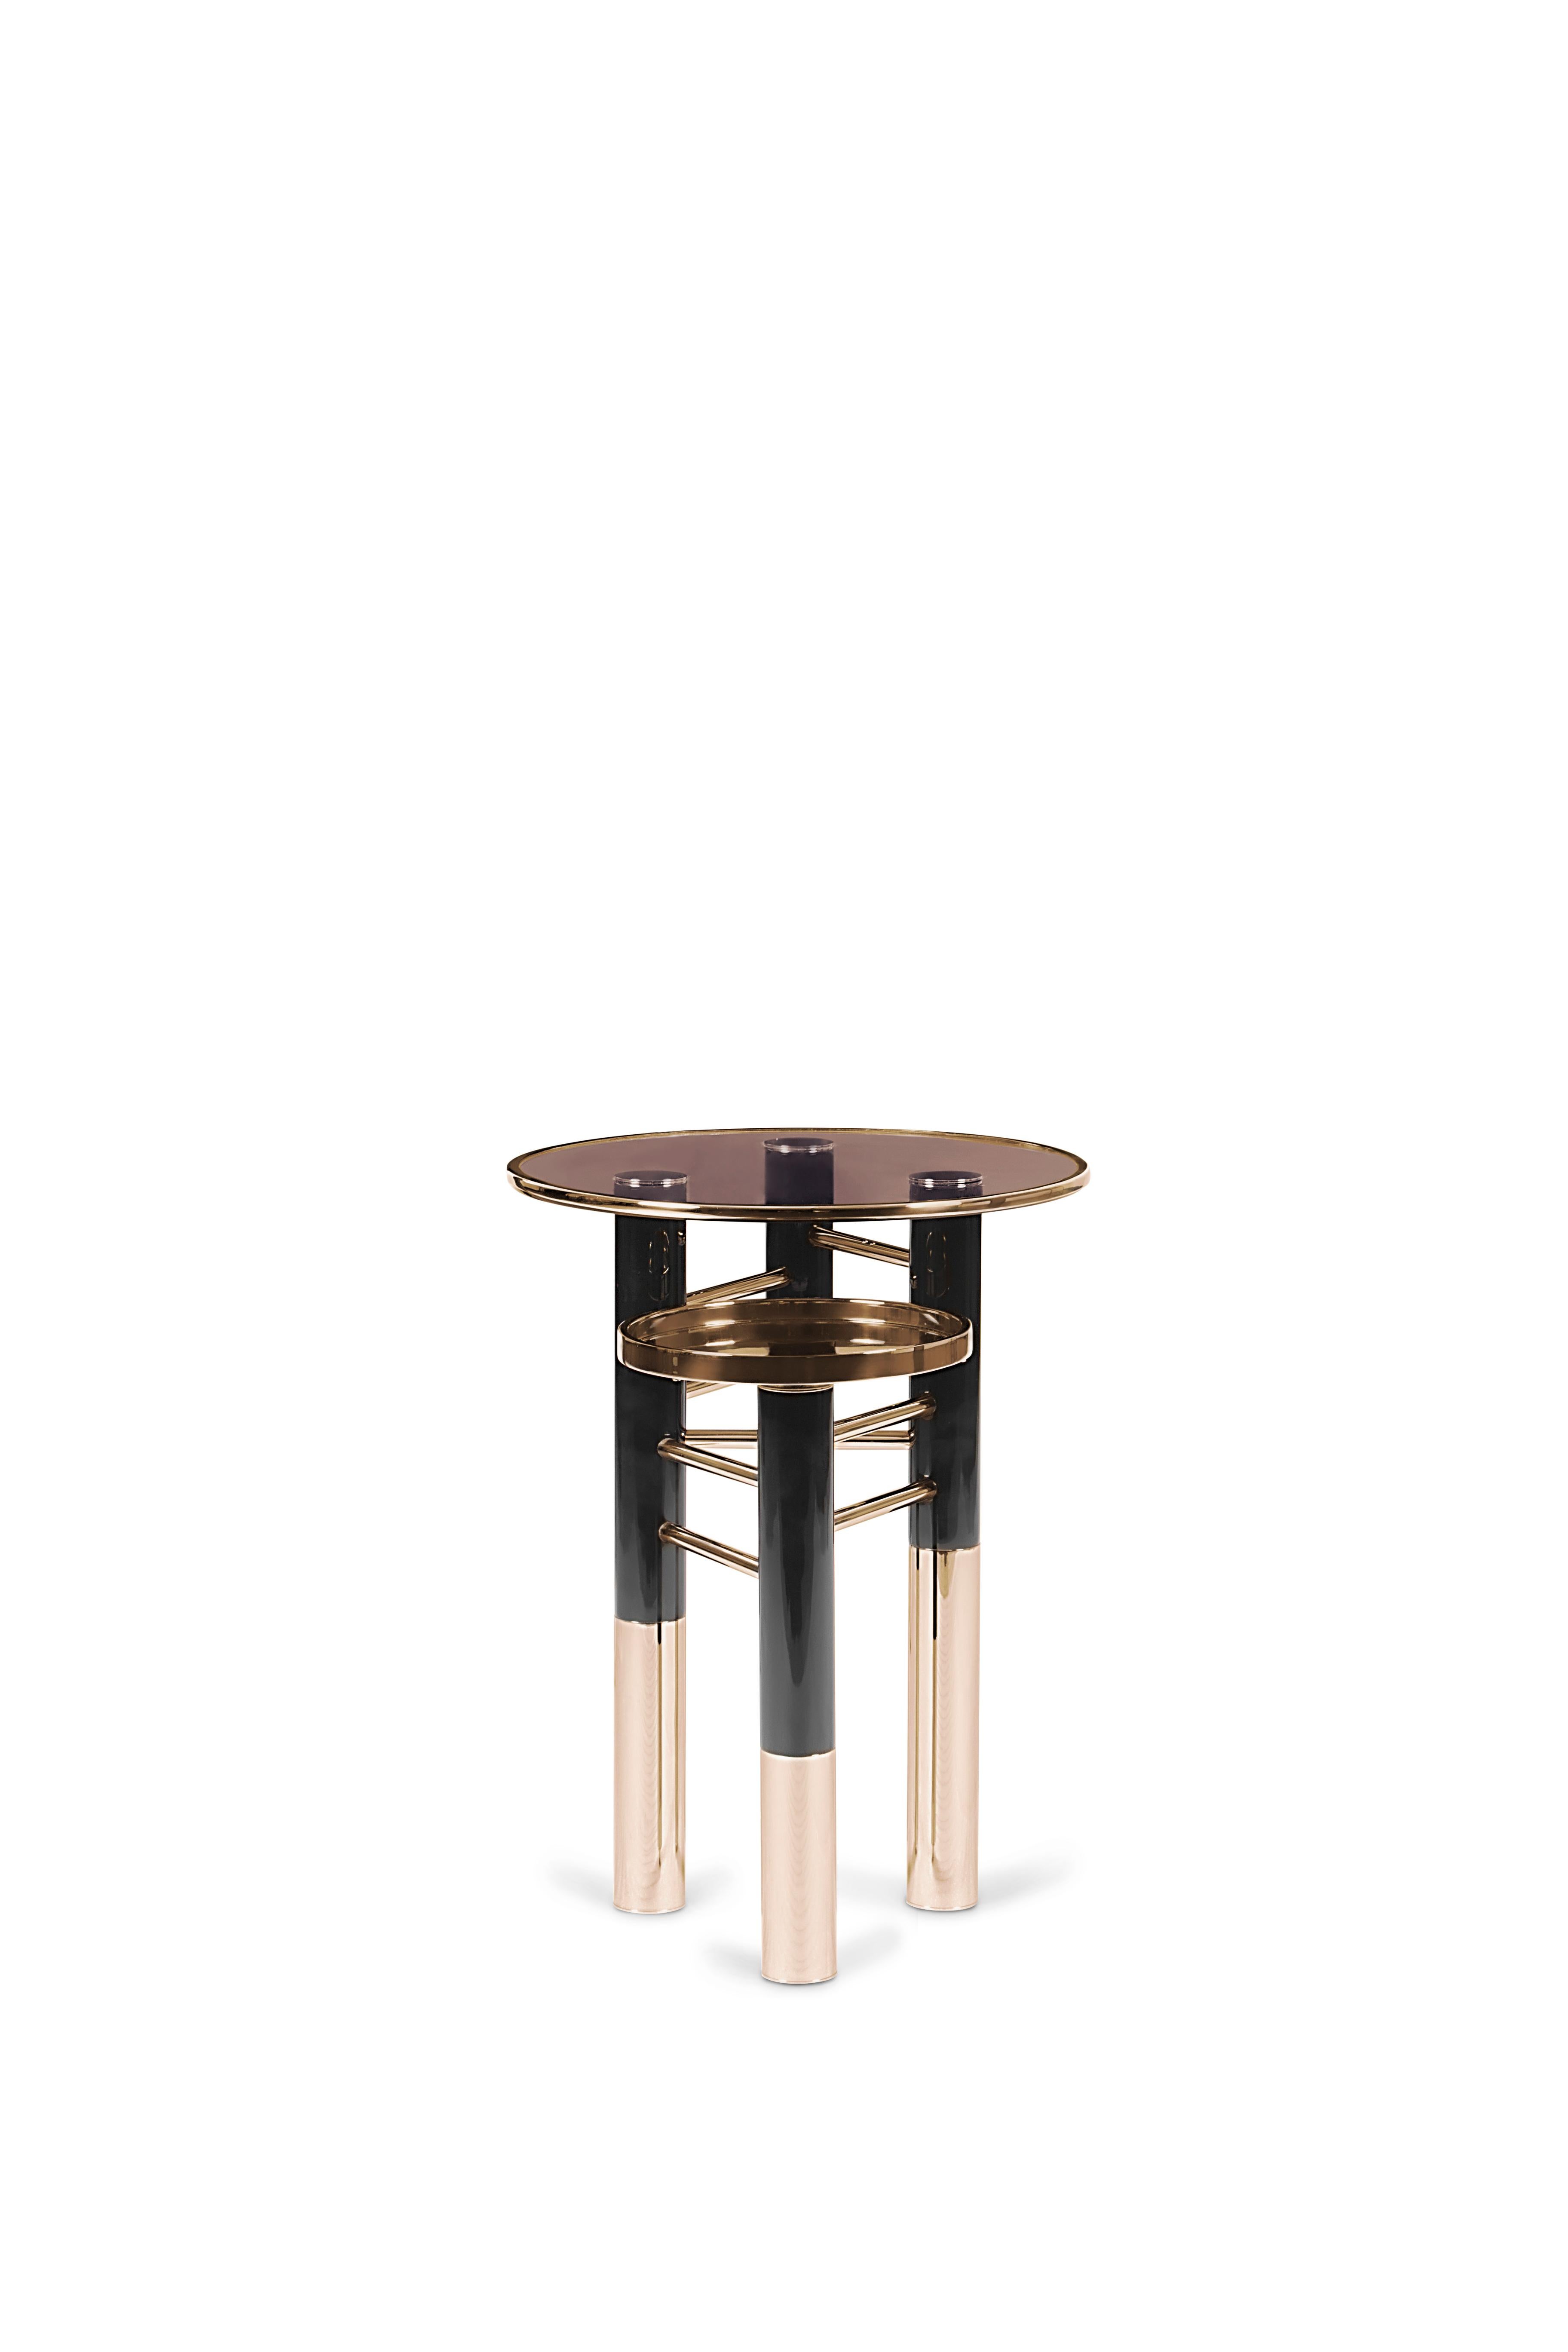 Reduced shapes, clean lines and lots of black ‐ the Konstantin Side Table truly embodies what an Essential piece is, an elegant look full of refinement and modernity. This side table features a brown glass top with a gold trim and a gold plated tray